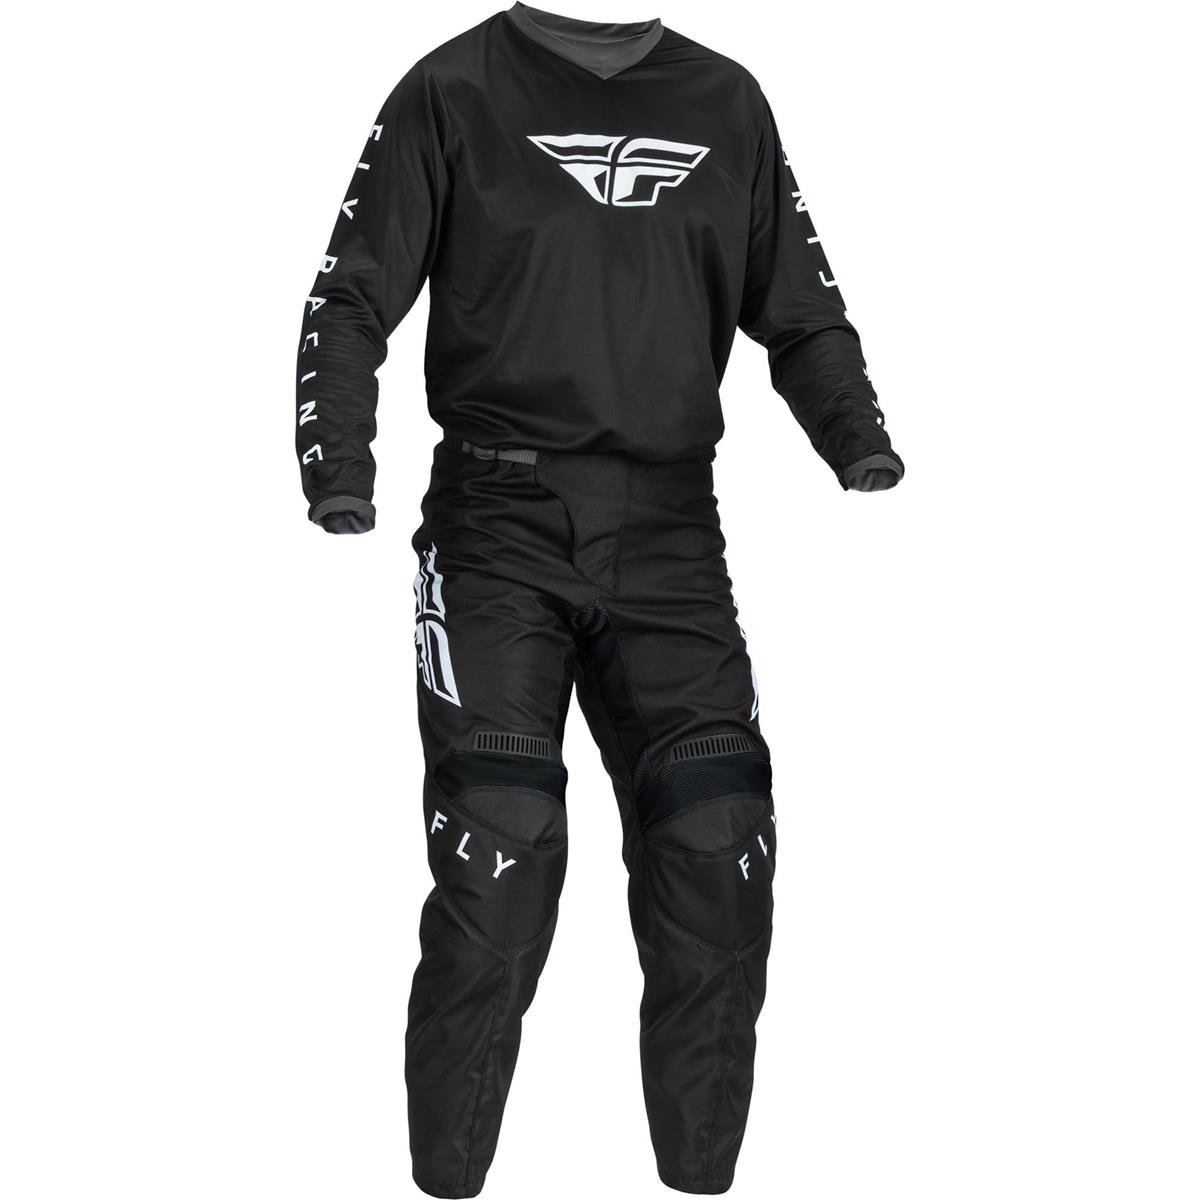 Fly Racing MX Gear Kit F-16 Set: 2 pieces, Black/White